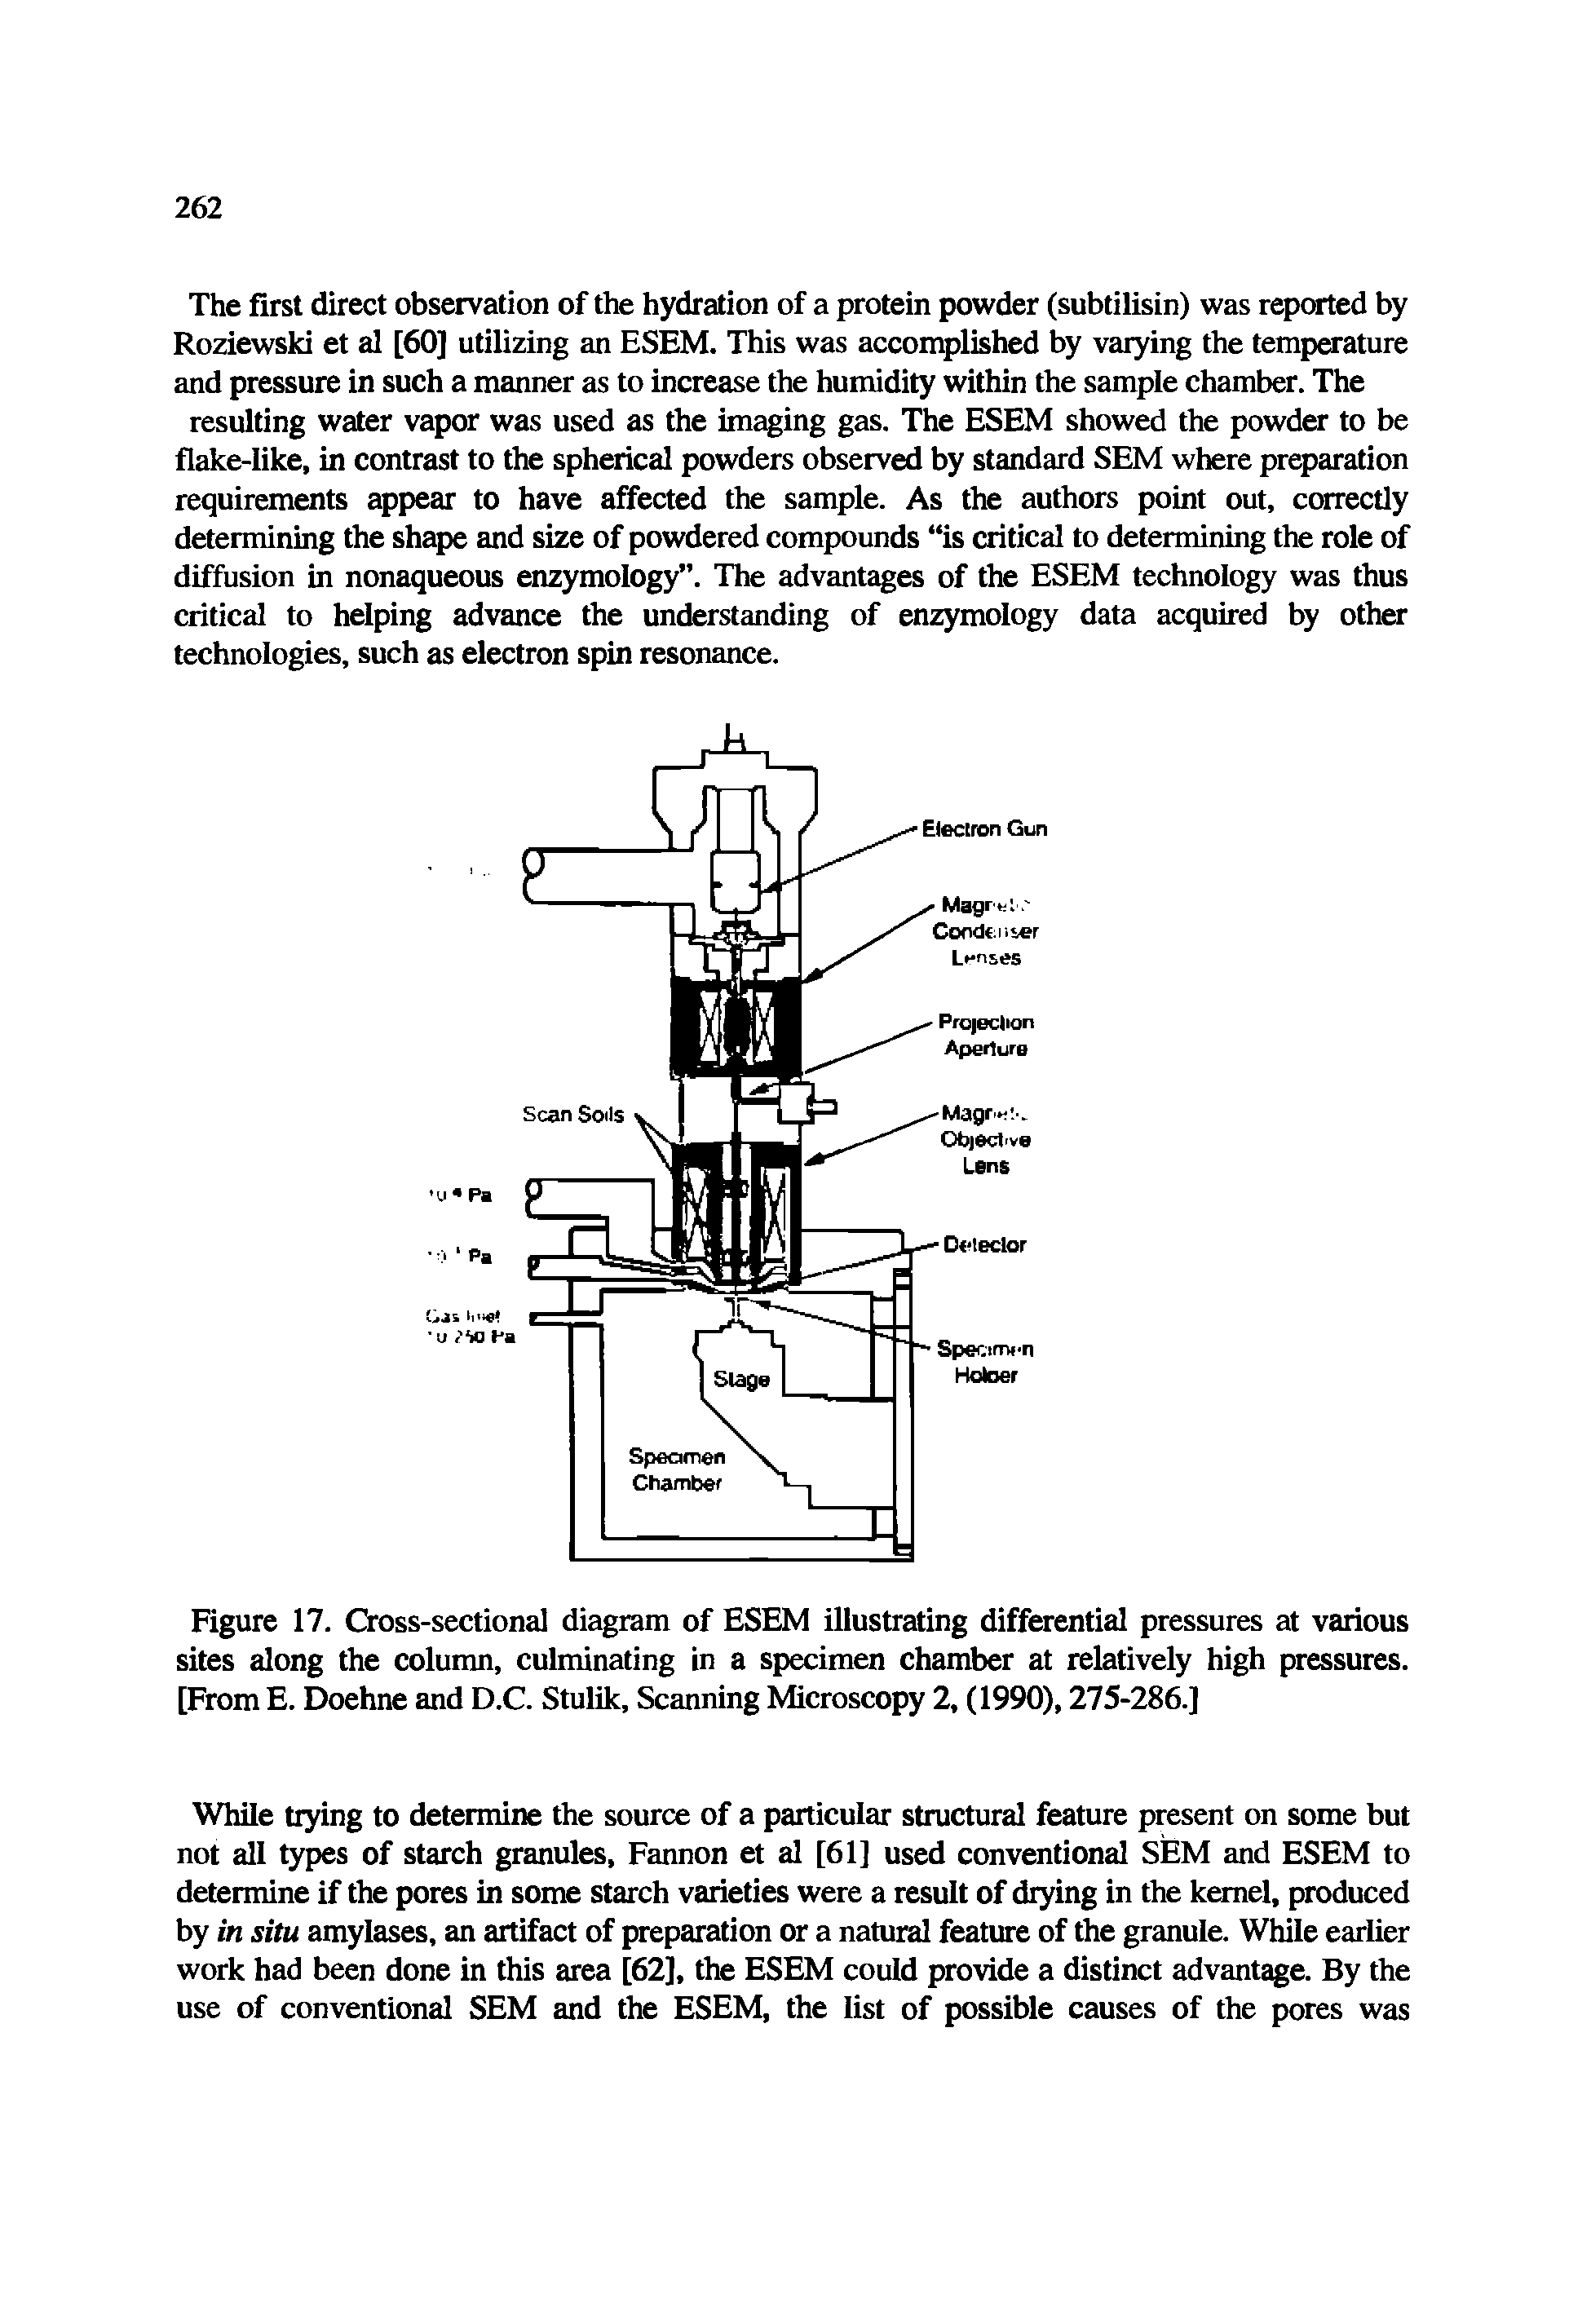 Figure 17. Cross-sectional diagram of ESEM illustrating differential pressures at various sites along the column, culminating in a specimen chamber at relatively high pressures. [From E. Doehne and D.C. Stulik, Scanning Microscopy 2, (1990), 275-286.]...